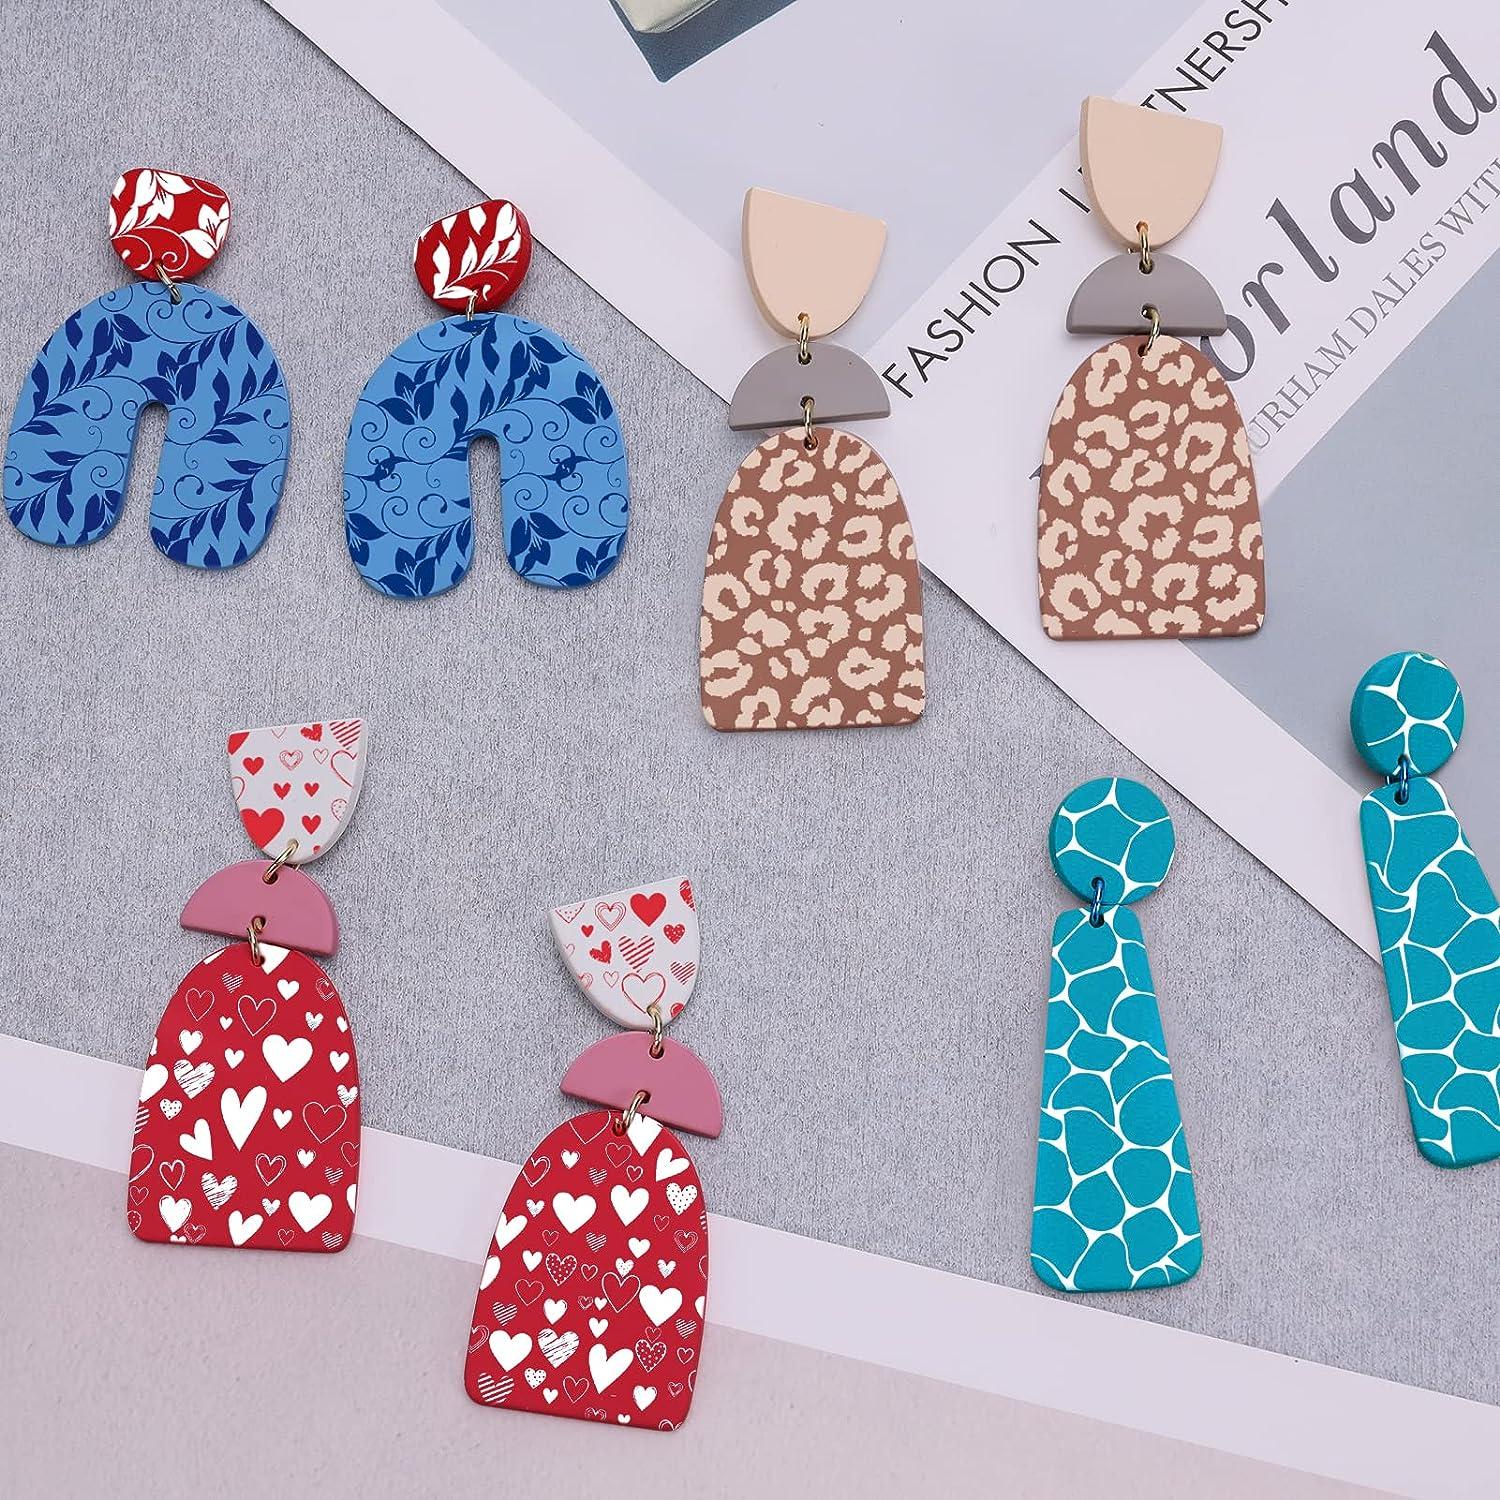  Caydo Polymer Clay Earring Making Kit with 3-Layer